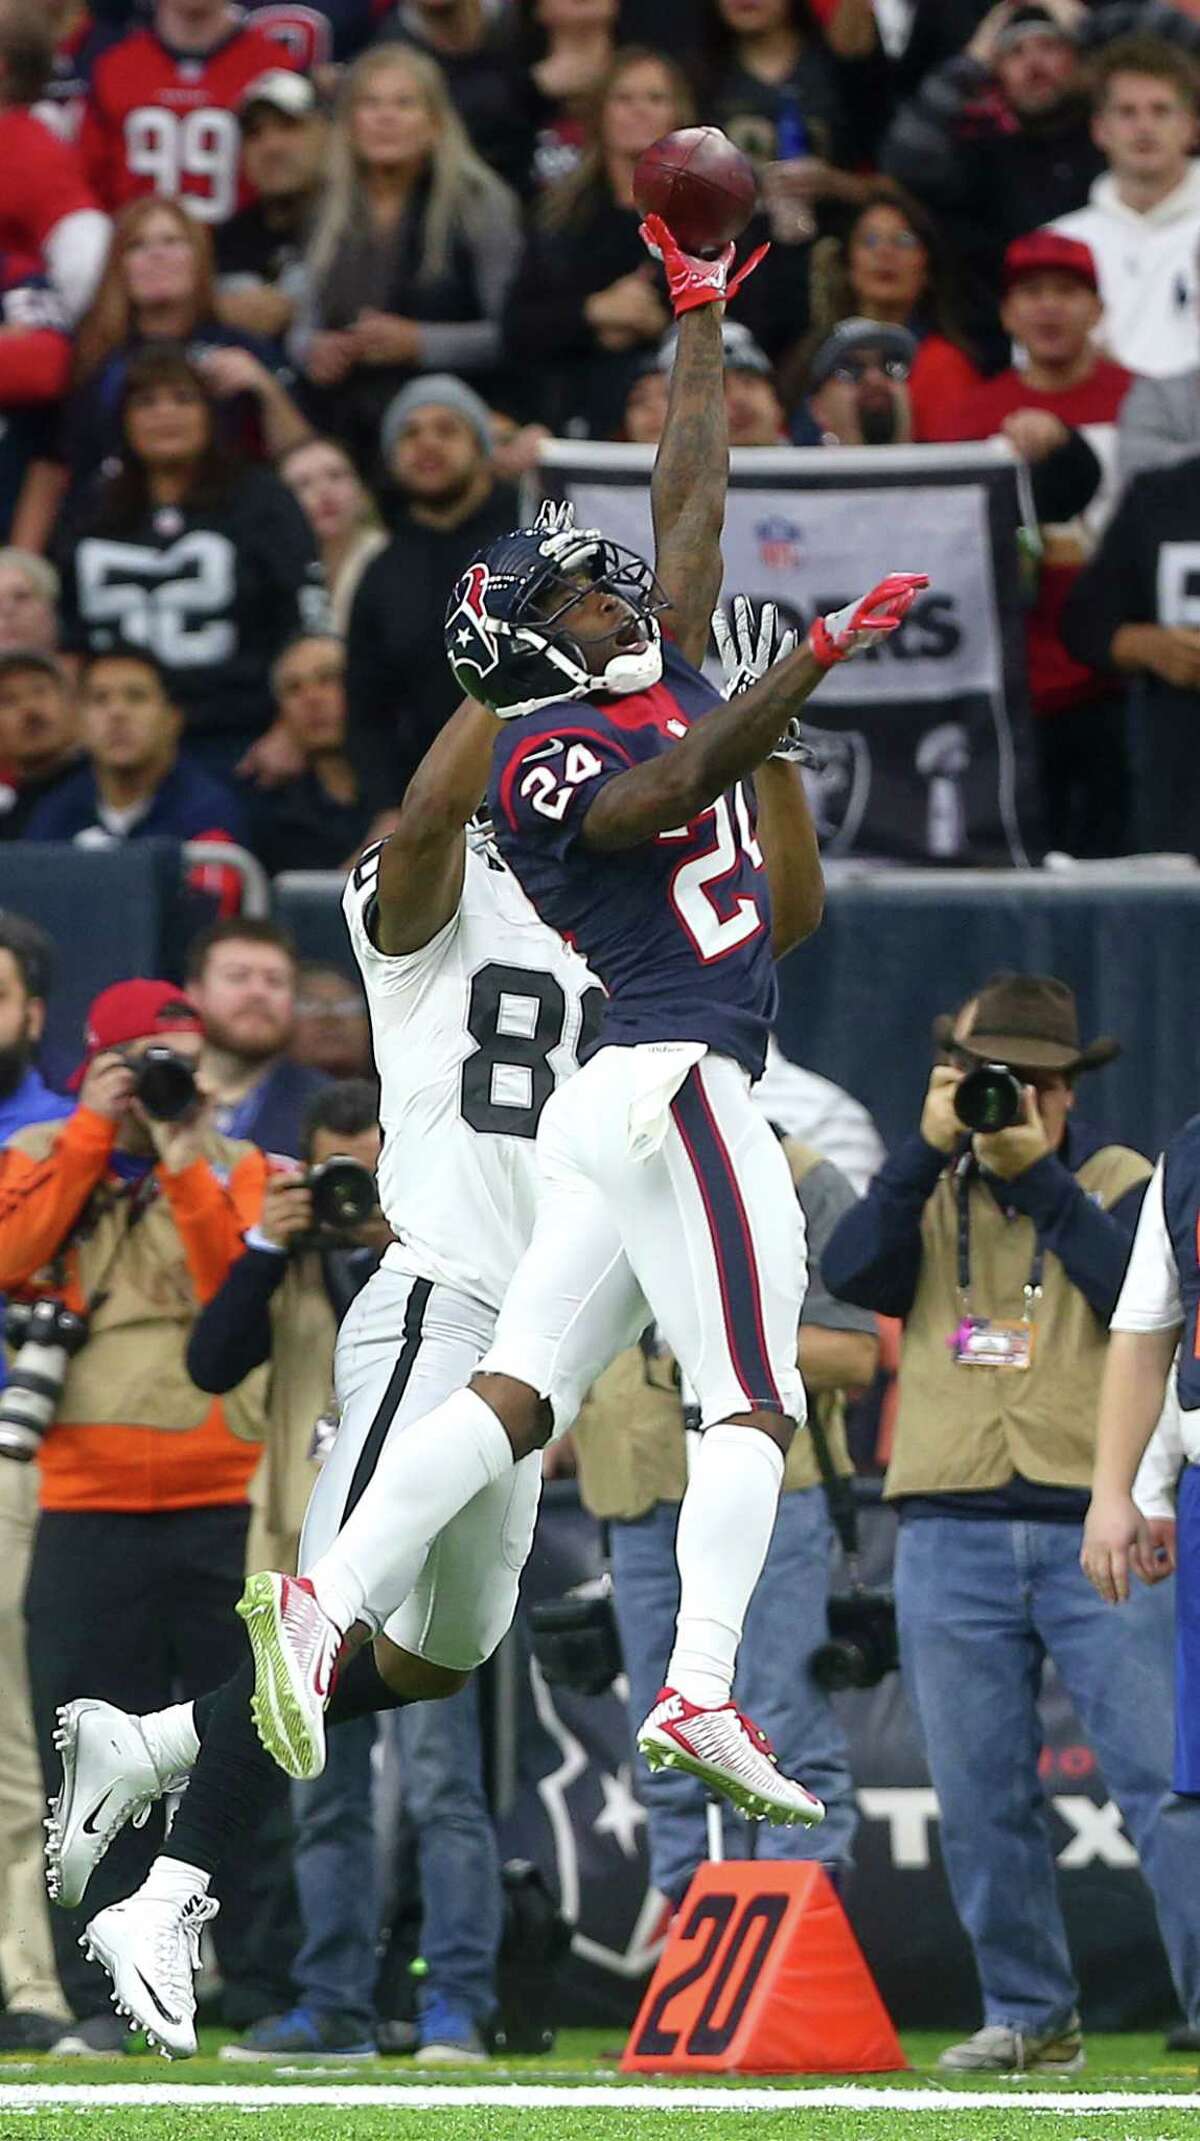 Texans cornerback Johnathan Joseph, right, deflects a pass intended for the Raiders' Amari Cooper in the playoff game. Joseph had 45 tackles and defensed nine passes last season.﻿